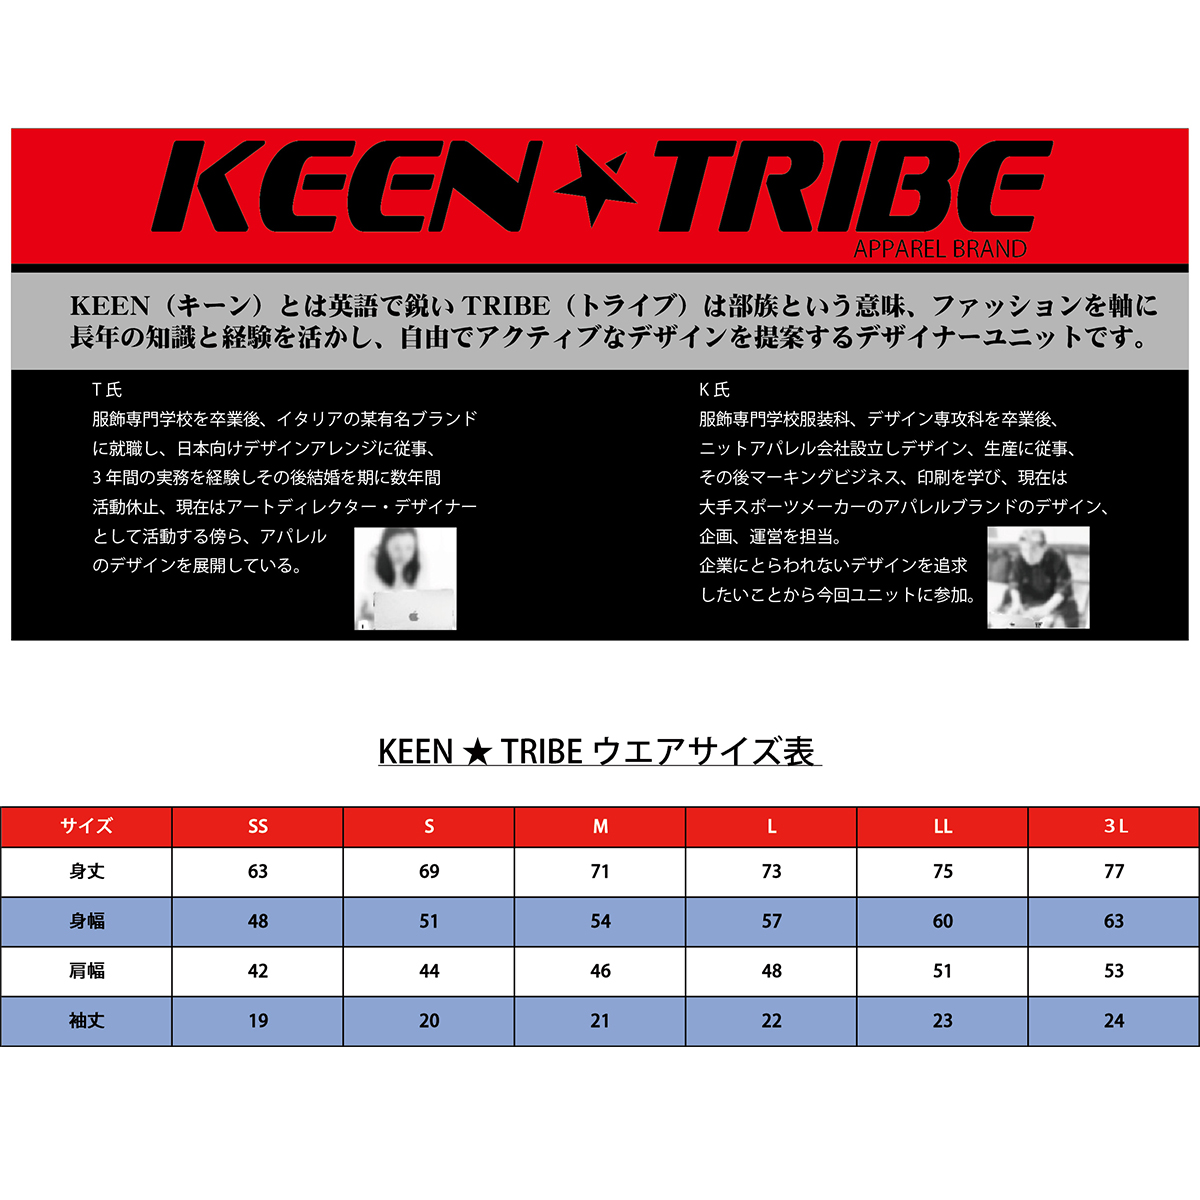 KEEN ★ TRIBE　KT-48(受注生産)